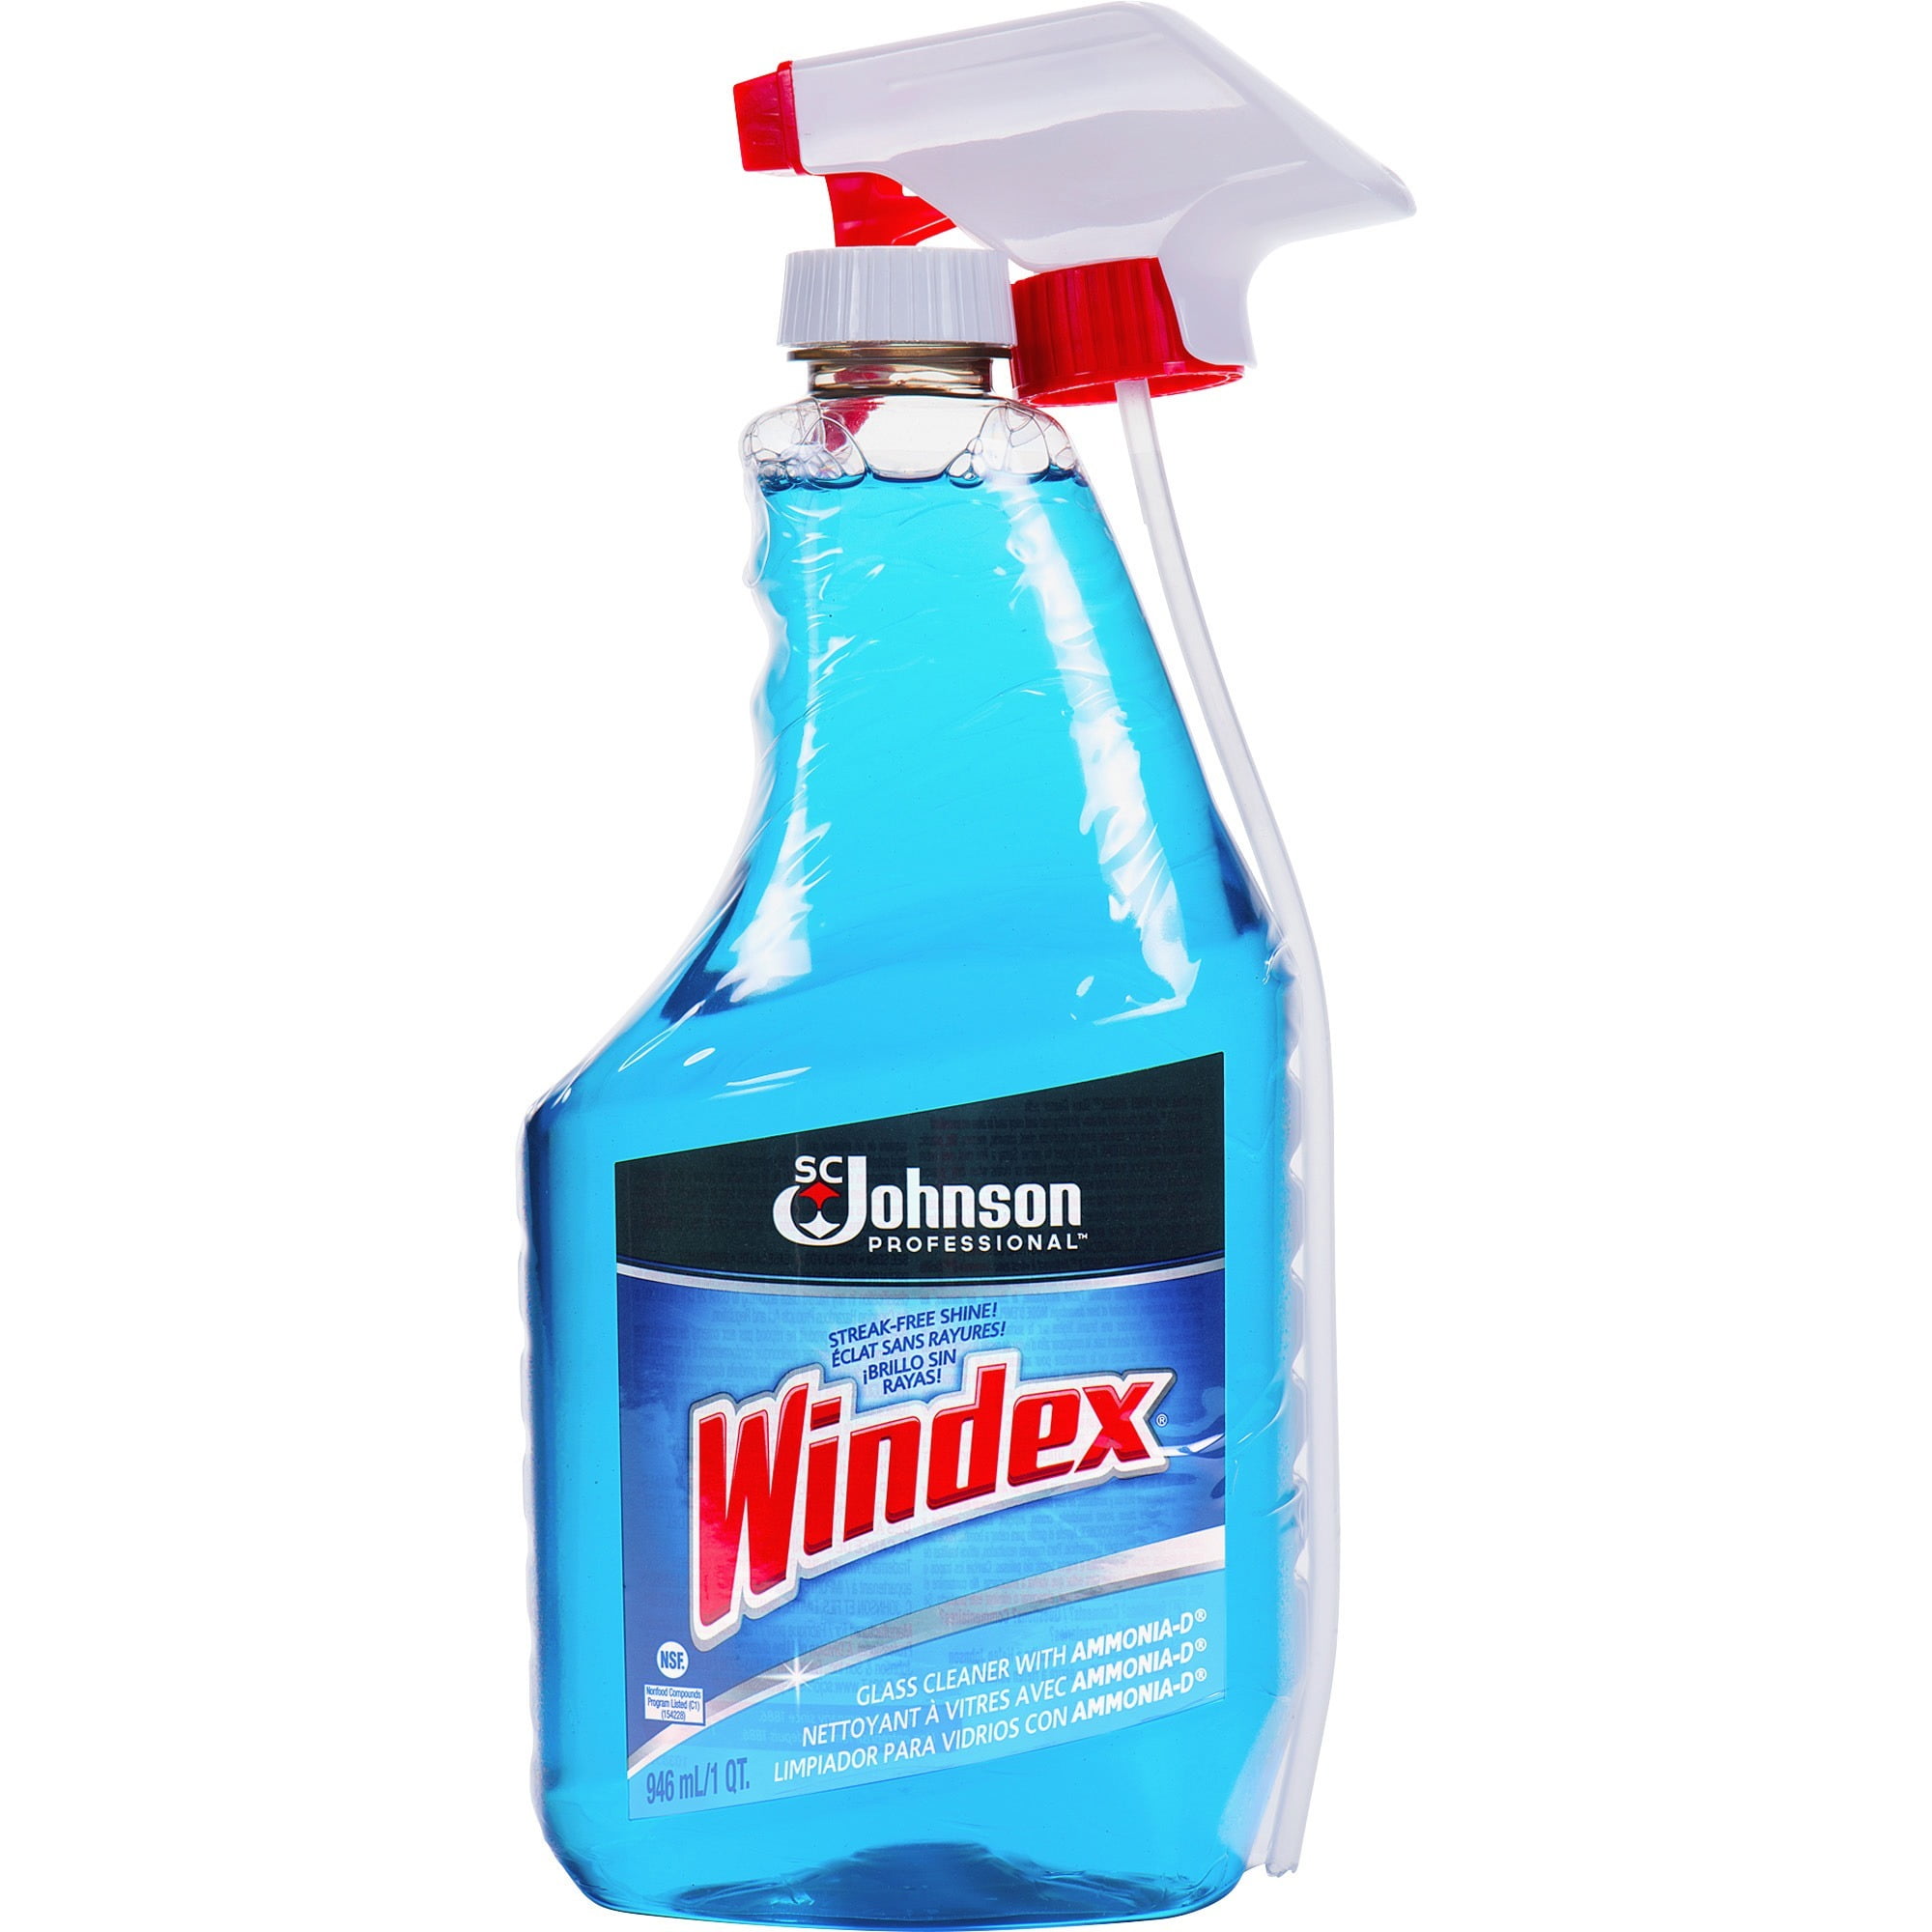 Where to buy cleaning products